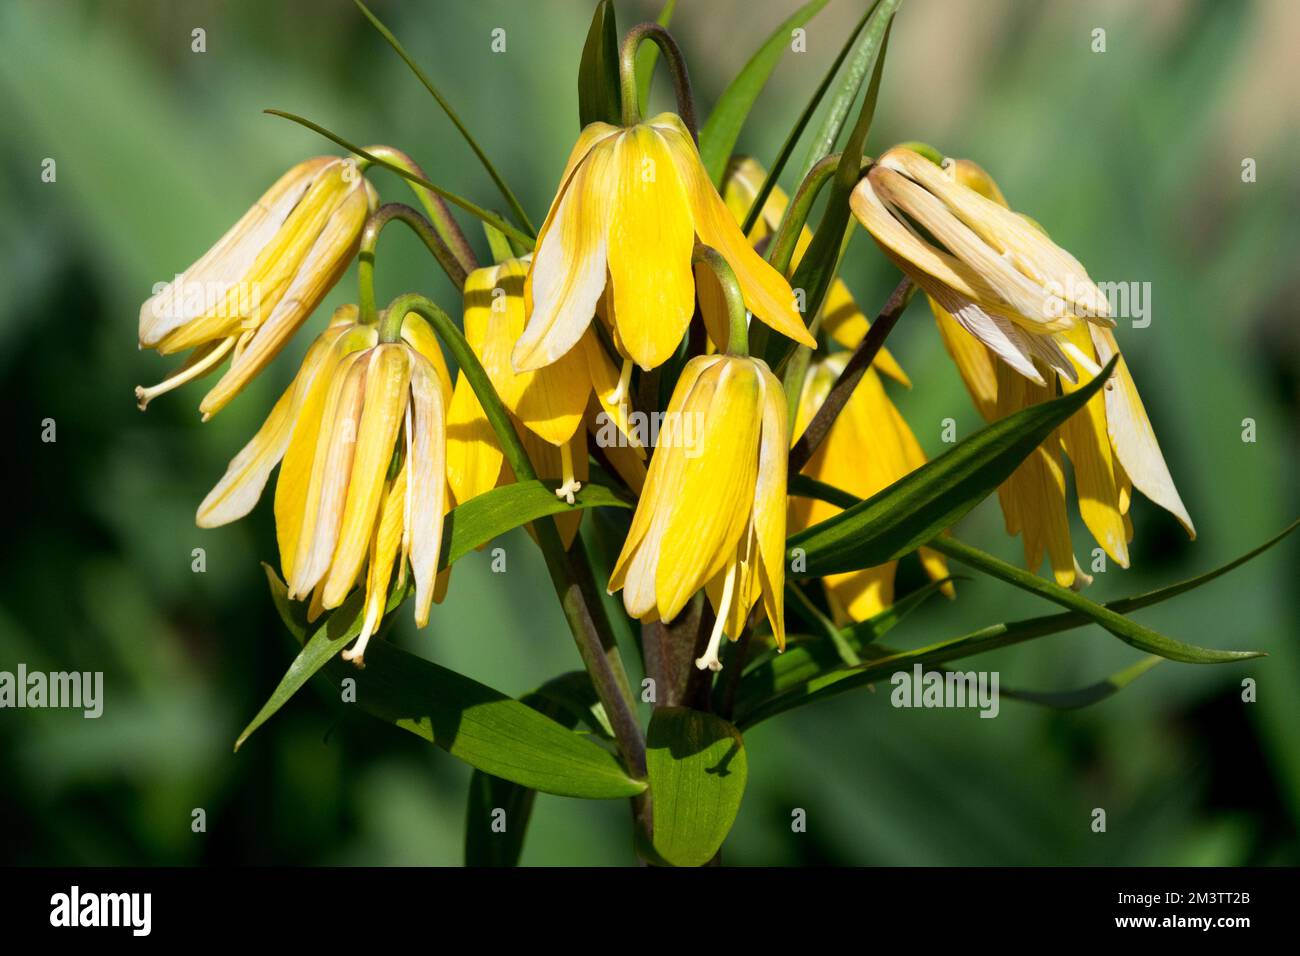 Crown Imperial Fritillary, Fritillaria imperialis 'Vivaldi', Flowers Spring, Pineapple Lily, Kings Crown Lily Stock Photo